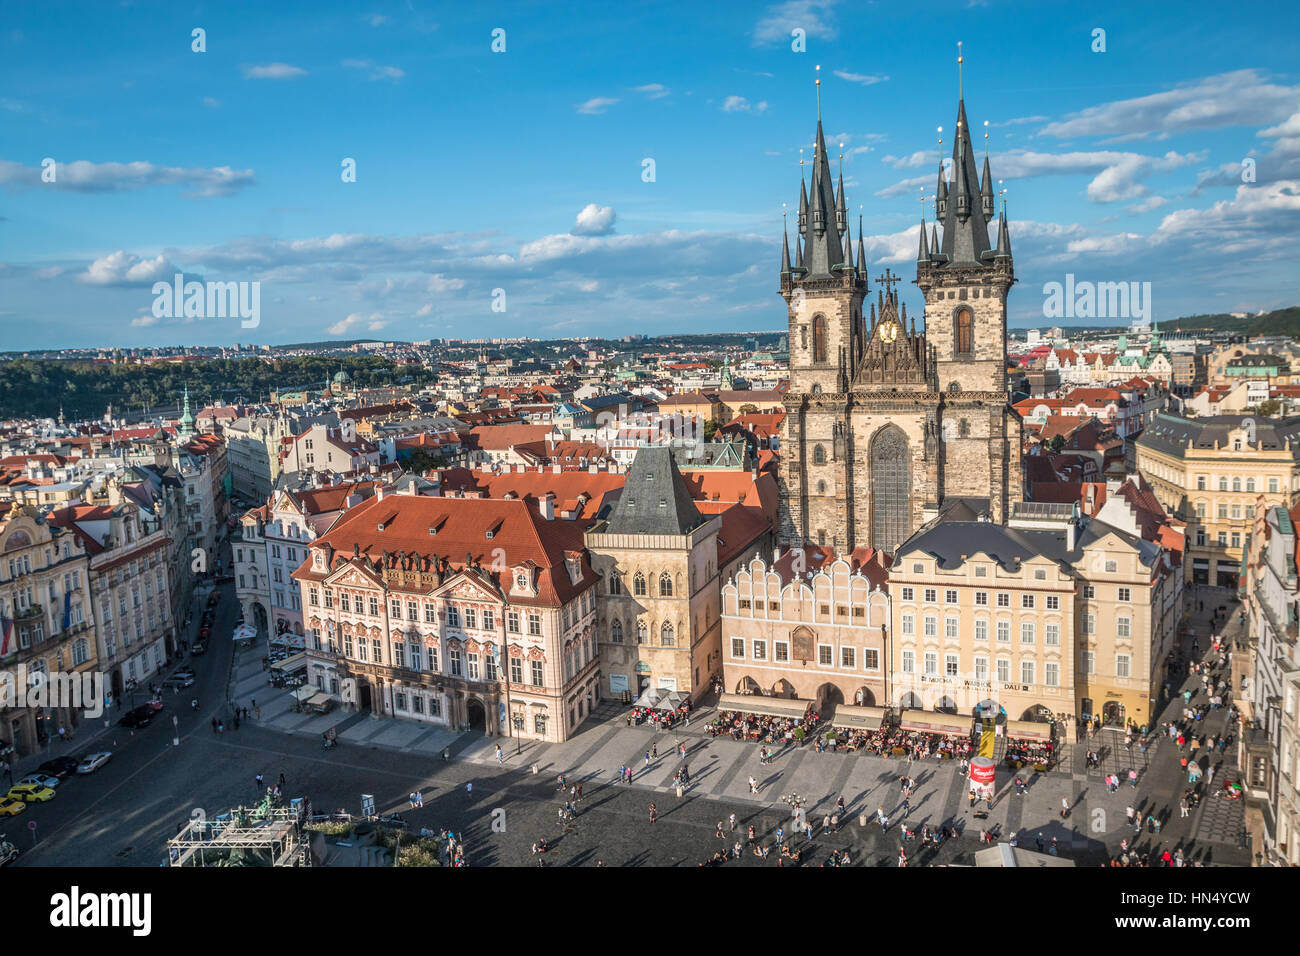 Old town square in Prague Stock Photo